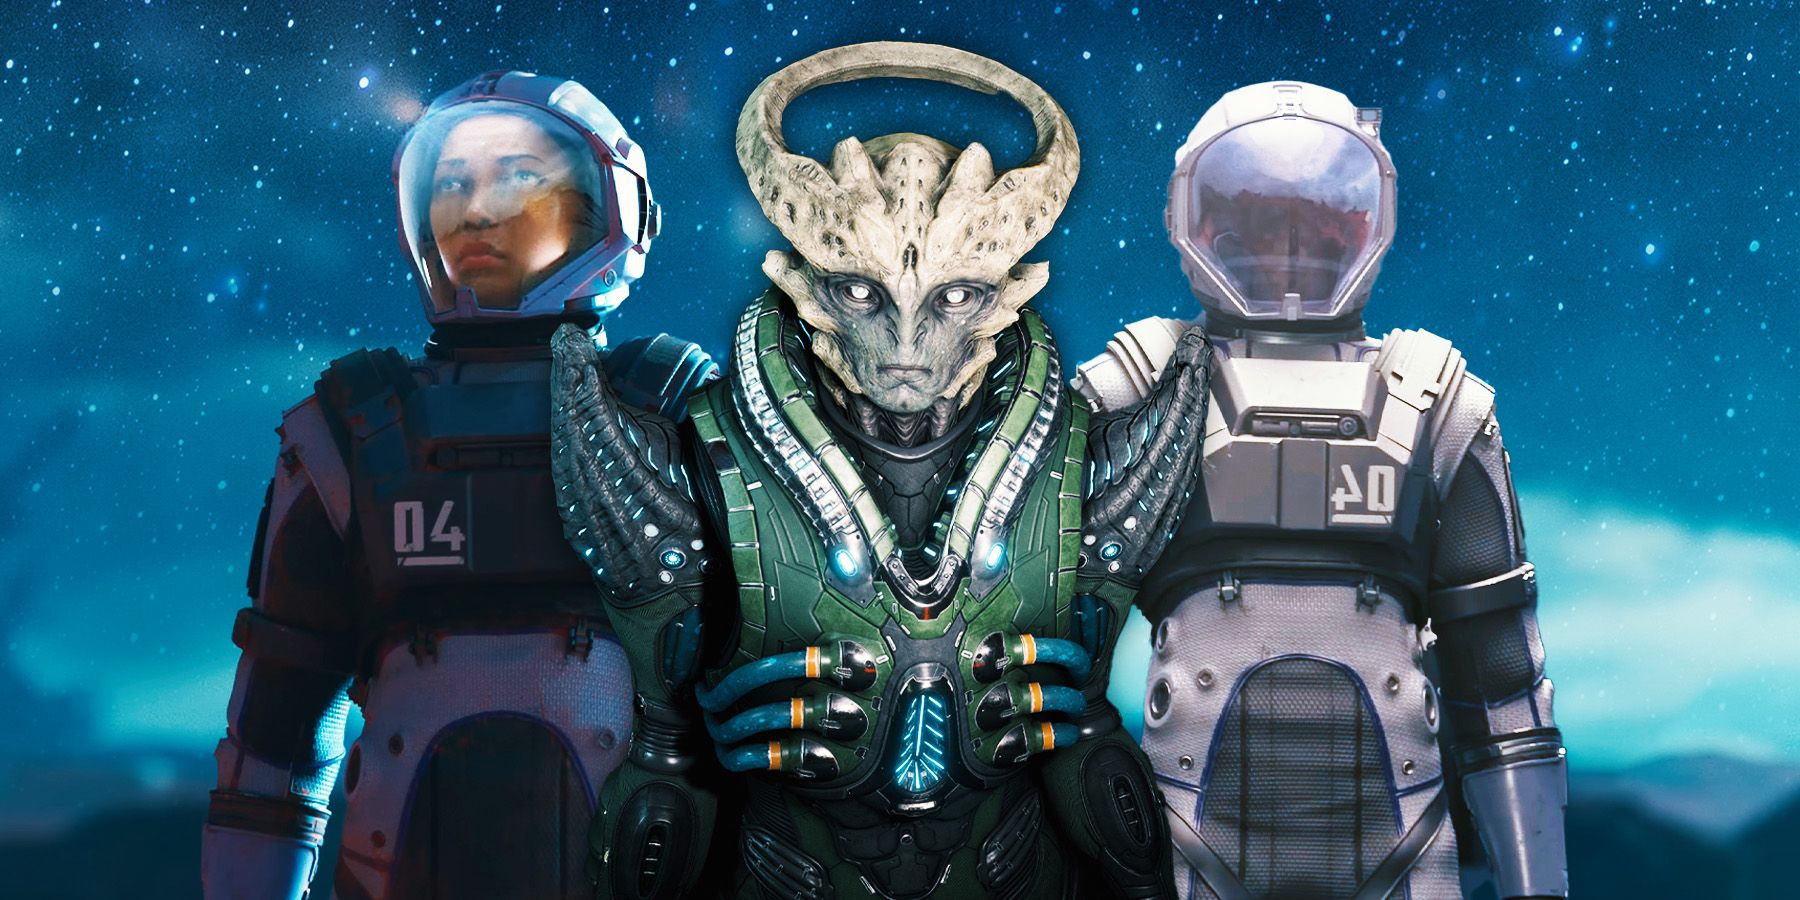 An alien with a ring-shaped growth on its head, wearing green armor, flanked by two humans in spacesuits.